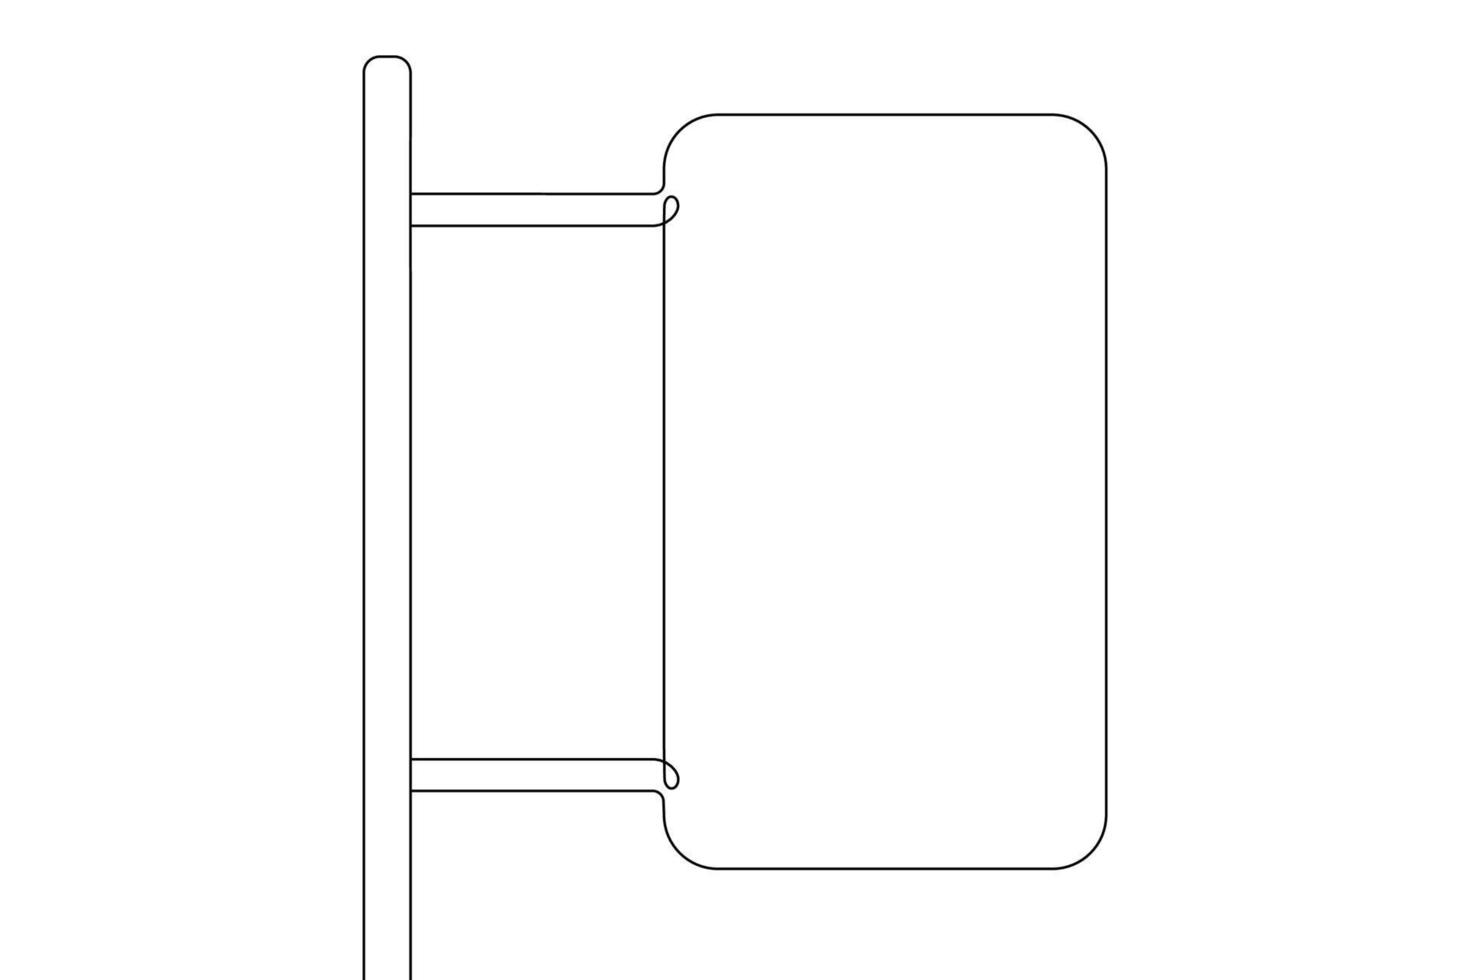 Blank banner mock up on stick. Protest placard, public transparency with holder. Single continuous line drawing. Vector illustration.